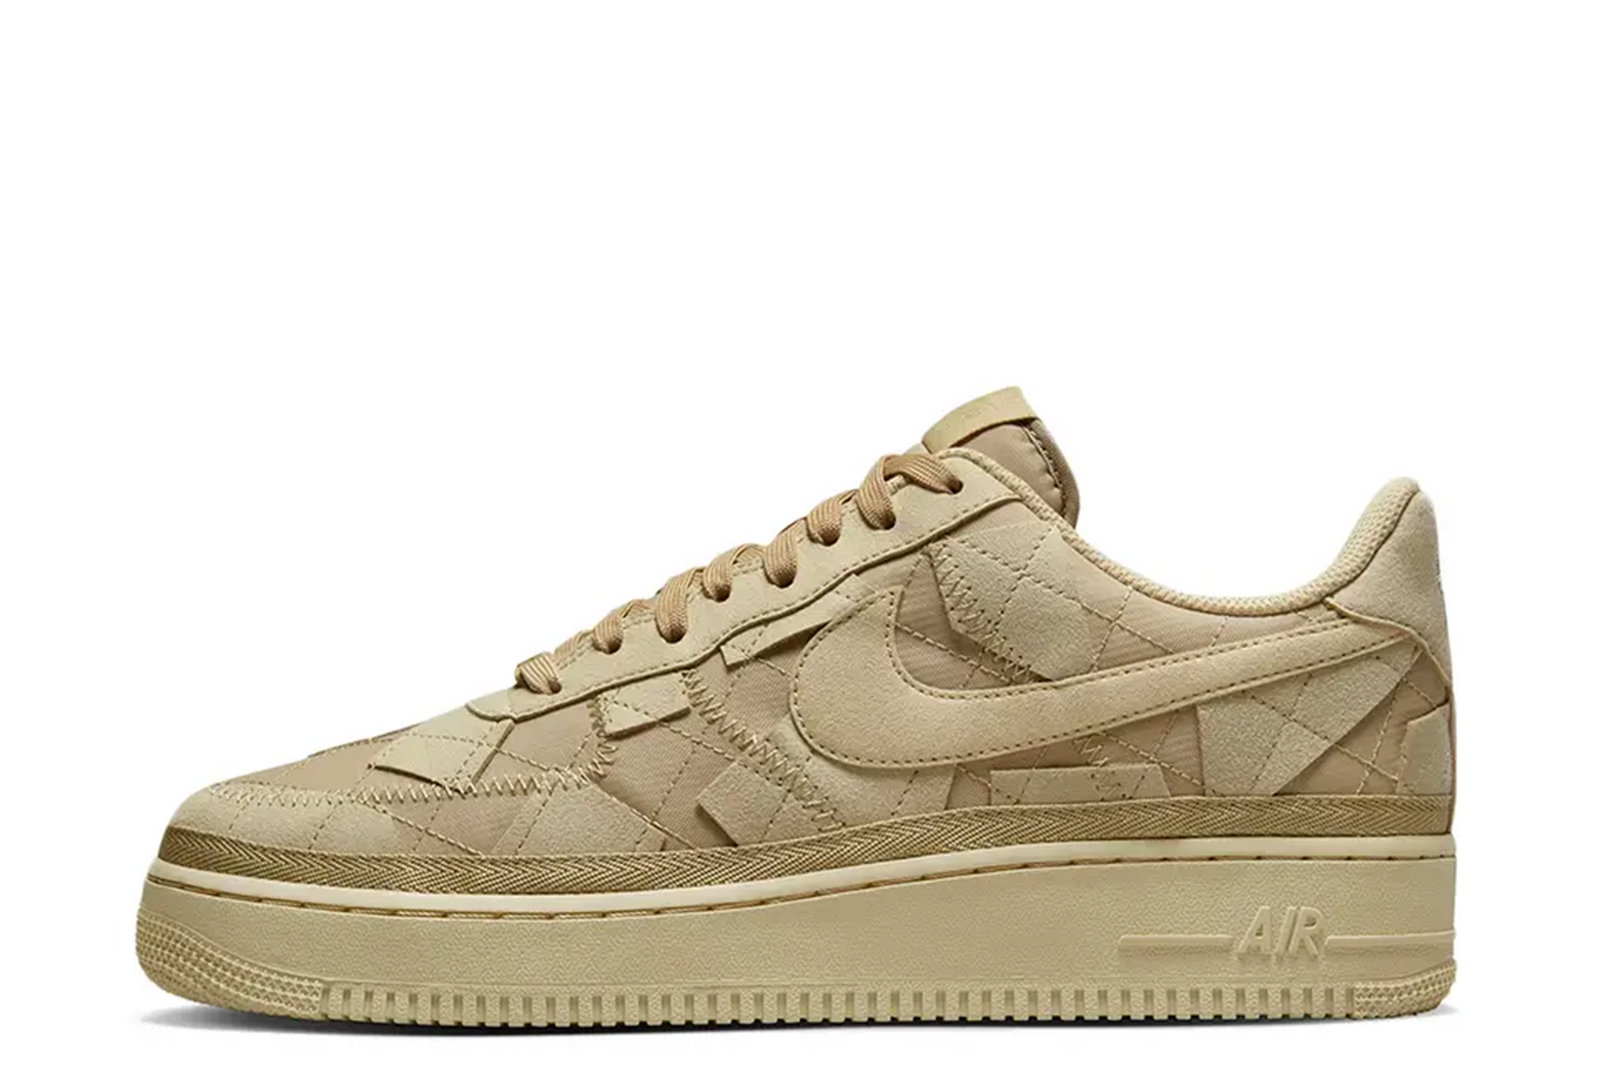 Nike Air Force 1 Low '07 LV8 Double Swoosh Olive Gold Black Nr:  40,41,42,43,44,45